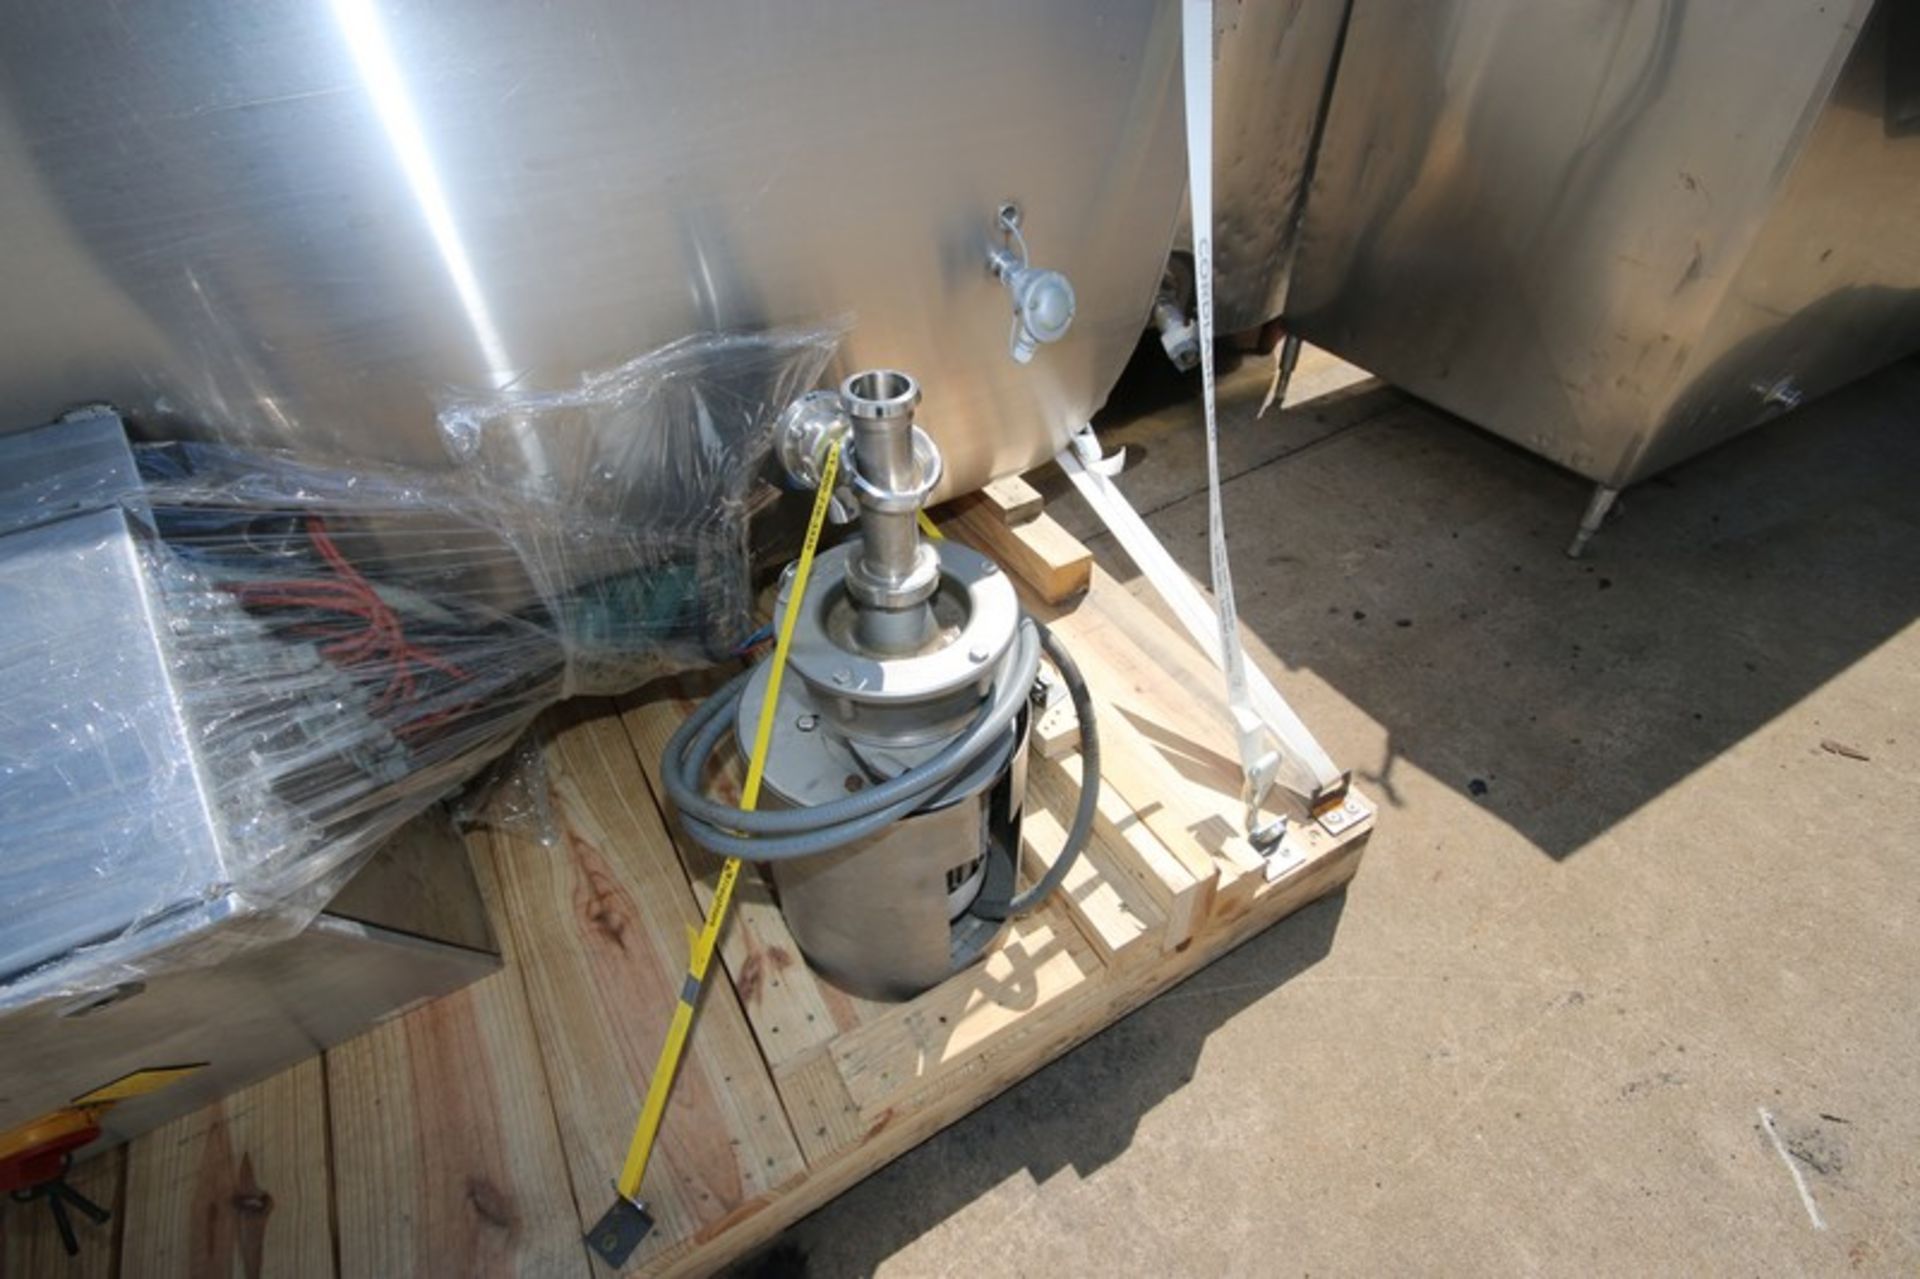 Munker/Braulogistik 15hL Combination Mash Tun/Kettle, M/N Brewhouse, S/N 1, 208 Volts, 3 Phase, with - Image 17 of 24